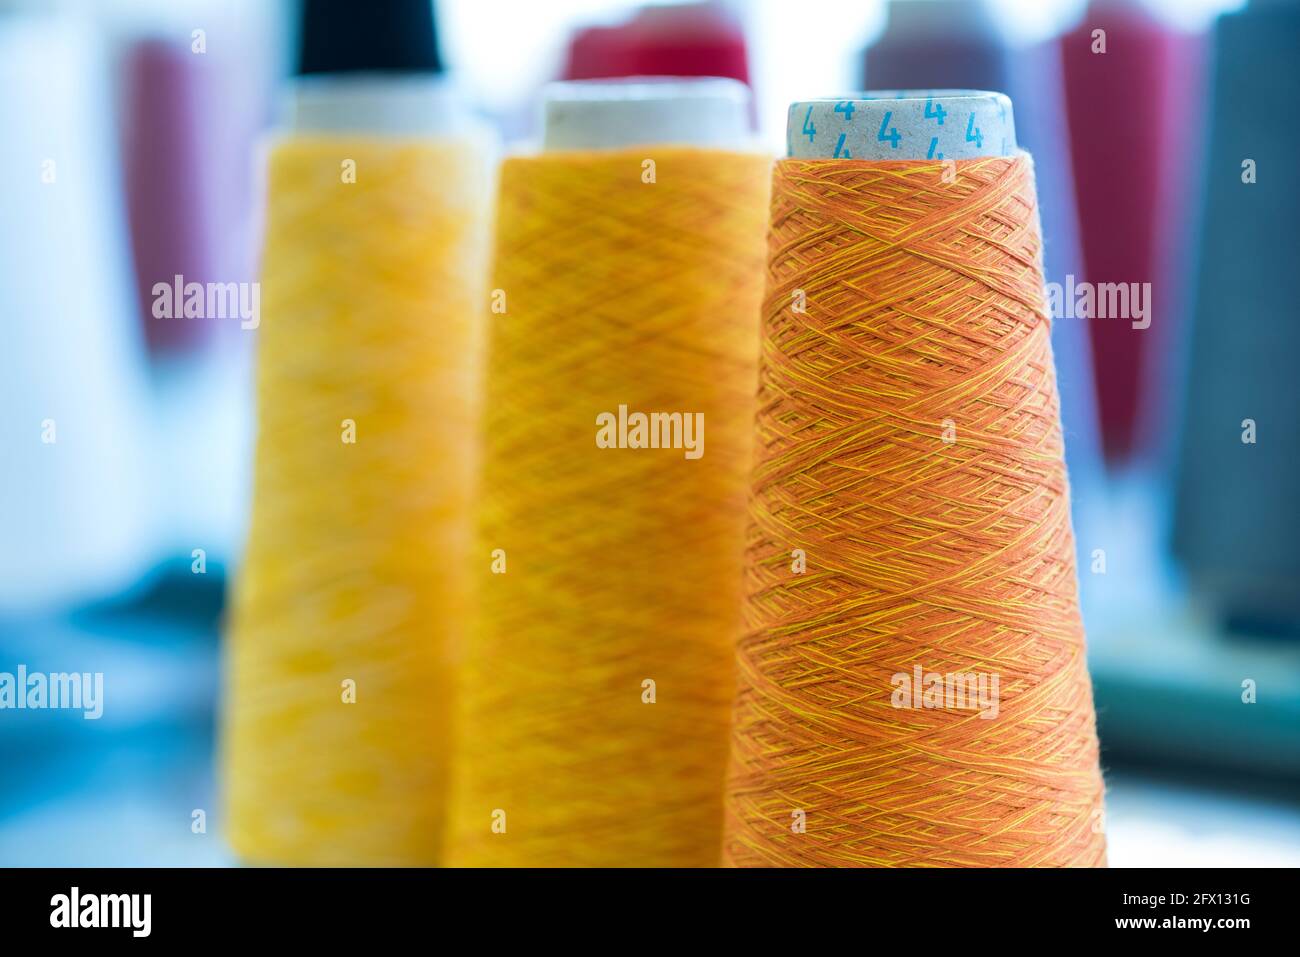 Three conical spools of colorful yellow and orange cashmere thread in a knitwear factory with focus to the orange reel in the foreground Stock Photo